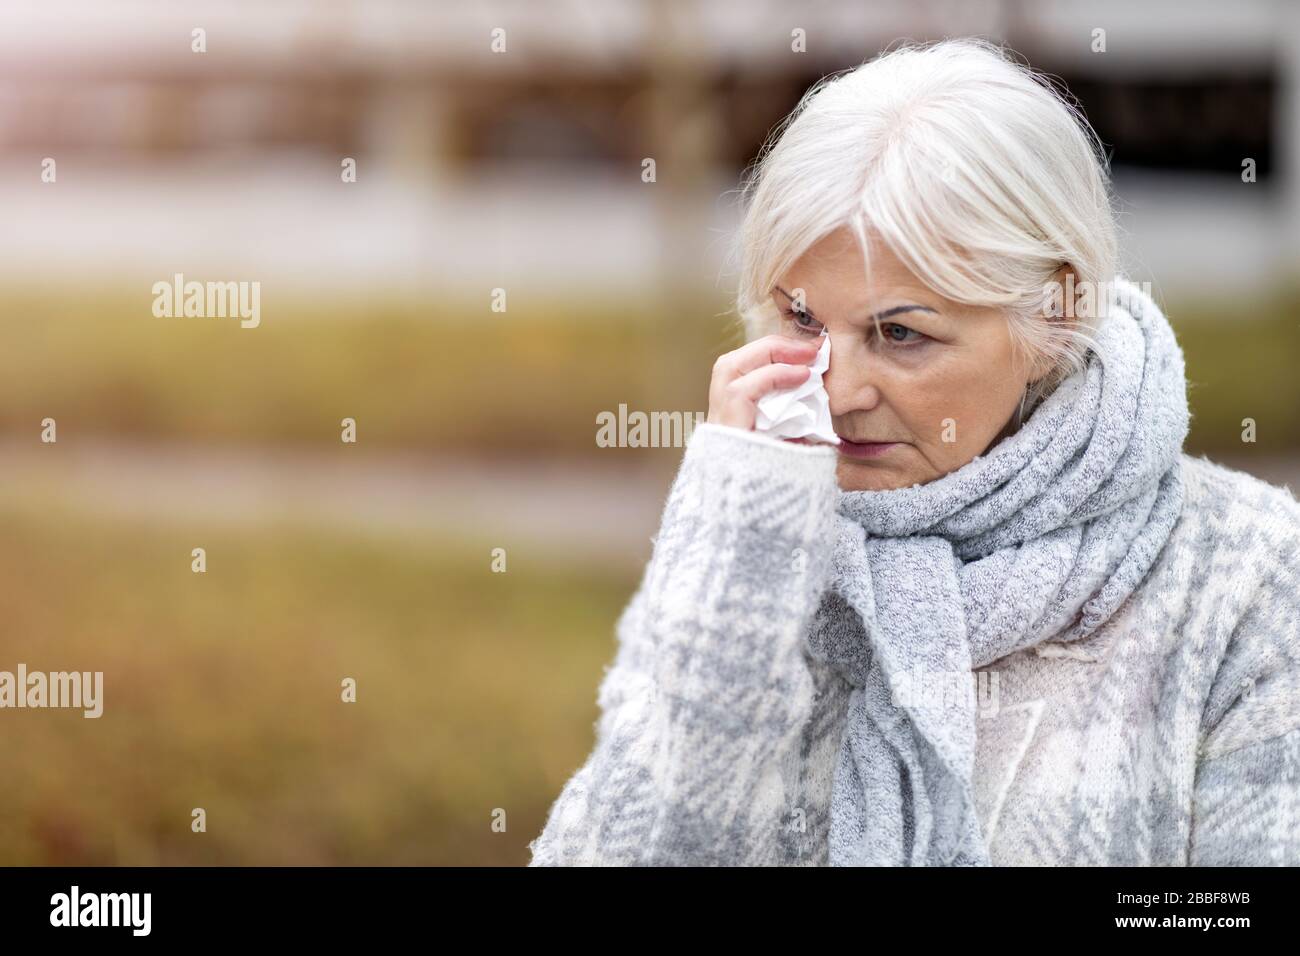 Unhappy senior woman wipes her eyes with a tissue Stock Photo